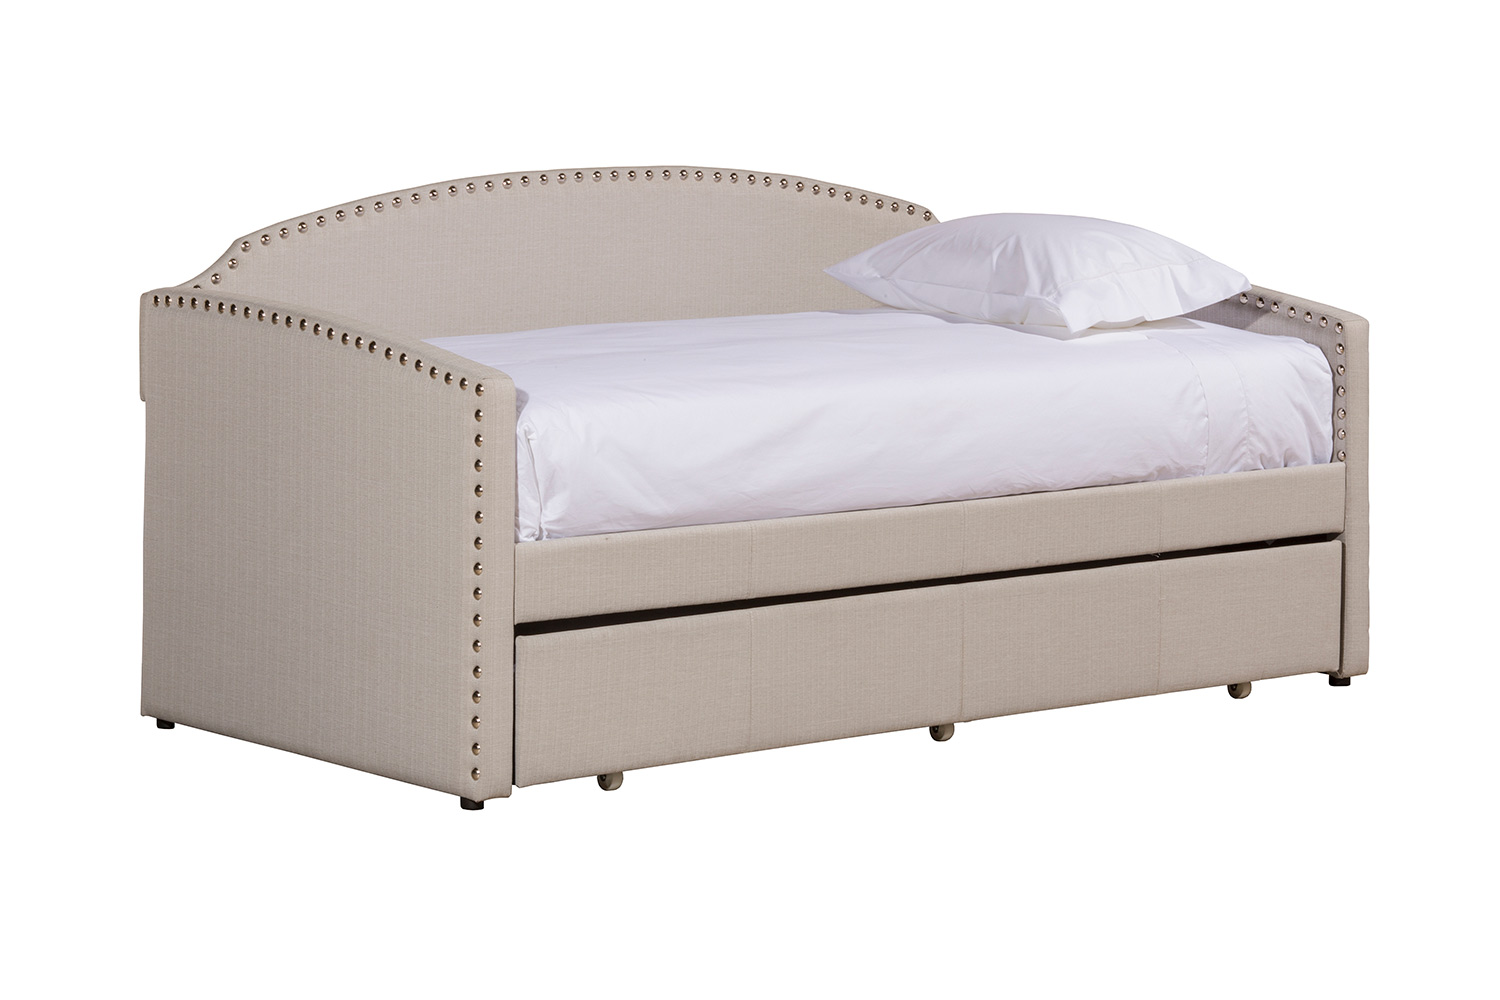 Hillsdale Lani Daybed with Trundle - Grey Fabric